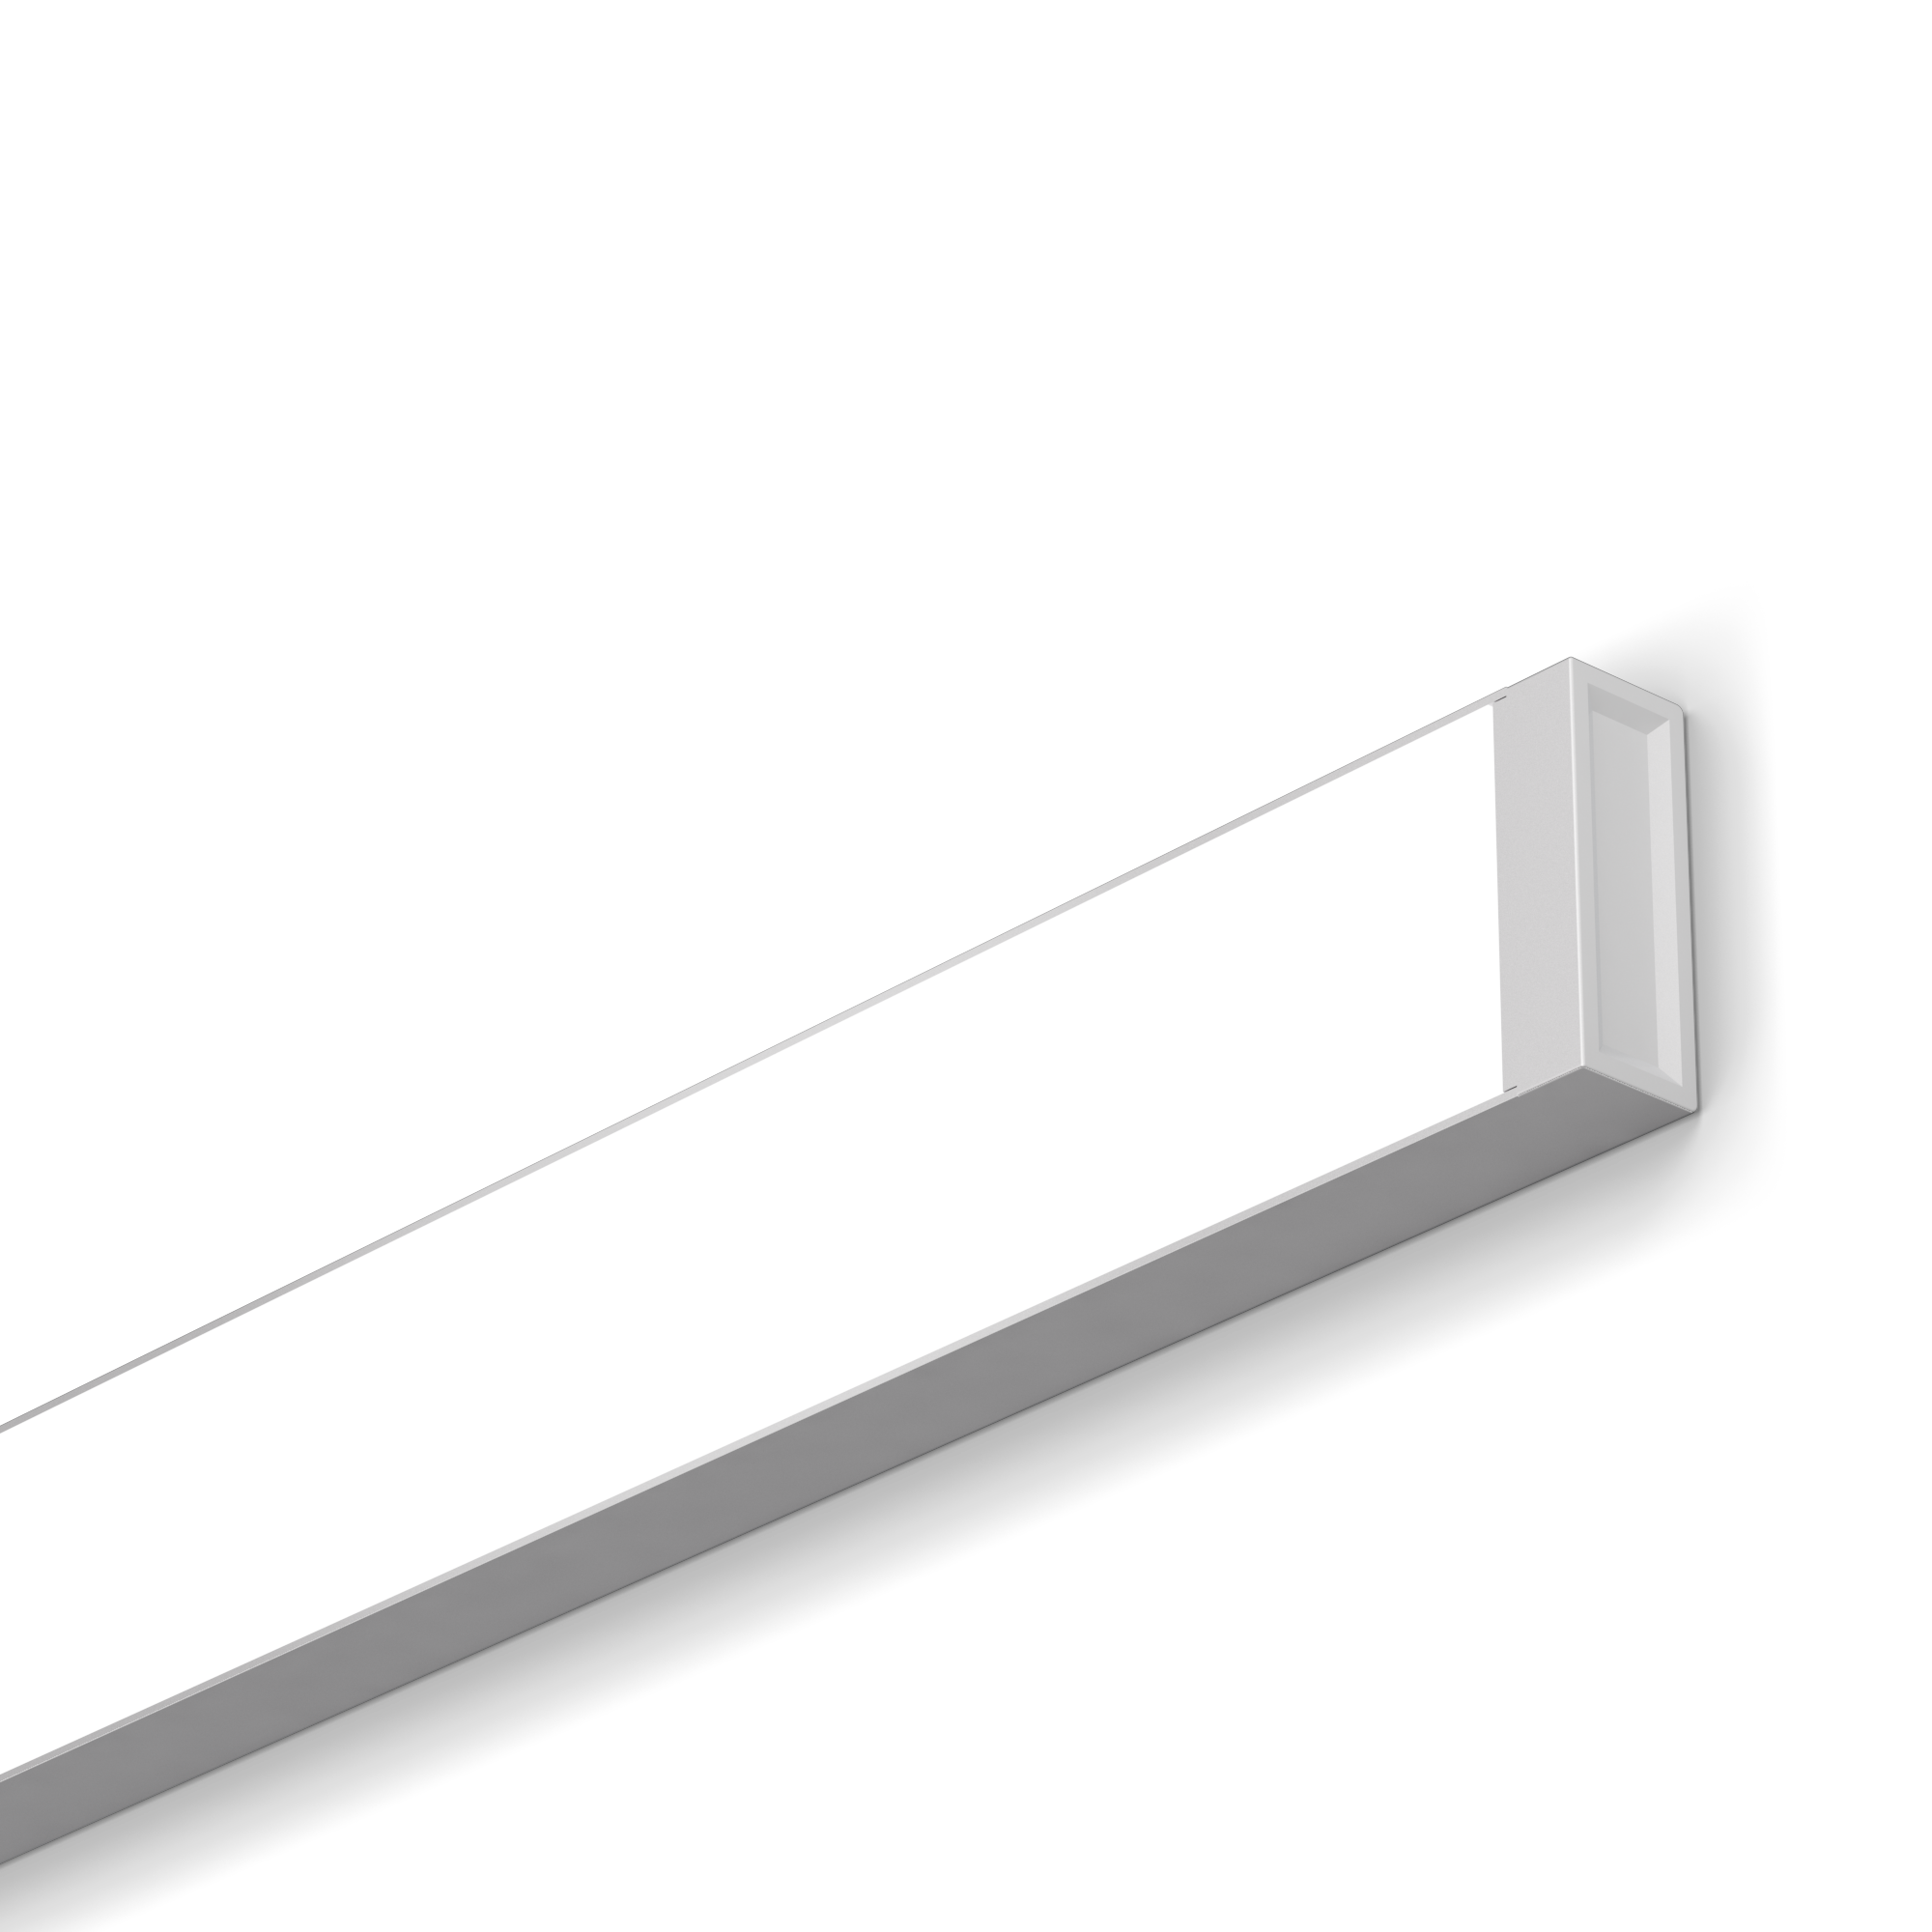 Edge-Lit Low-Profile LED Linear
EDGESolo 2.75 is an innovative low-profile wall-mounted LED luminaire designed to provide the perfect direct light. EDGE products all provide best-in-class efficiency and beam control options. EDGESolo is specification-grade with high lumen per foot, high CRI, and circadian options. EDGESolo incorporates an engineered LED light engine with fully customizable choices for lumen output, CCT, and CRI.

 

Rectangular profile: 2.75” x 0.98”